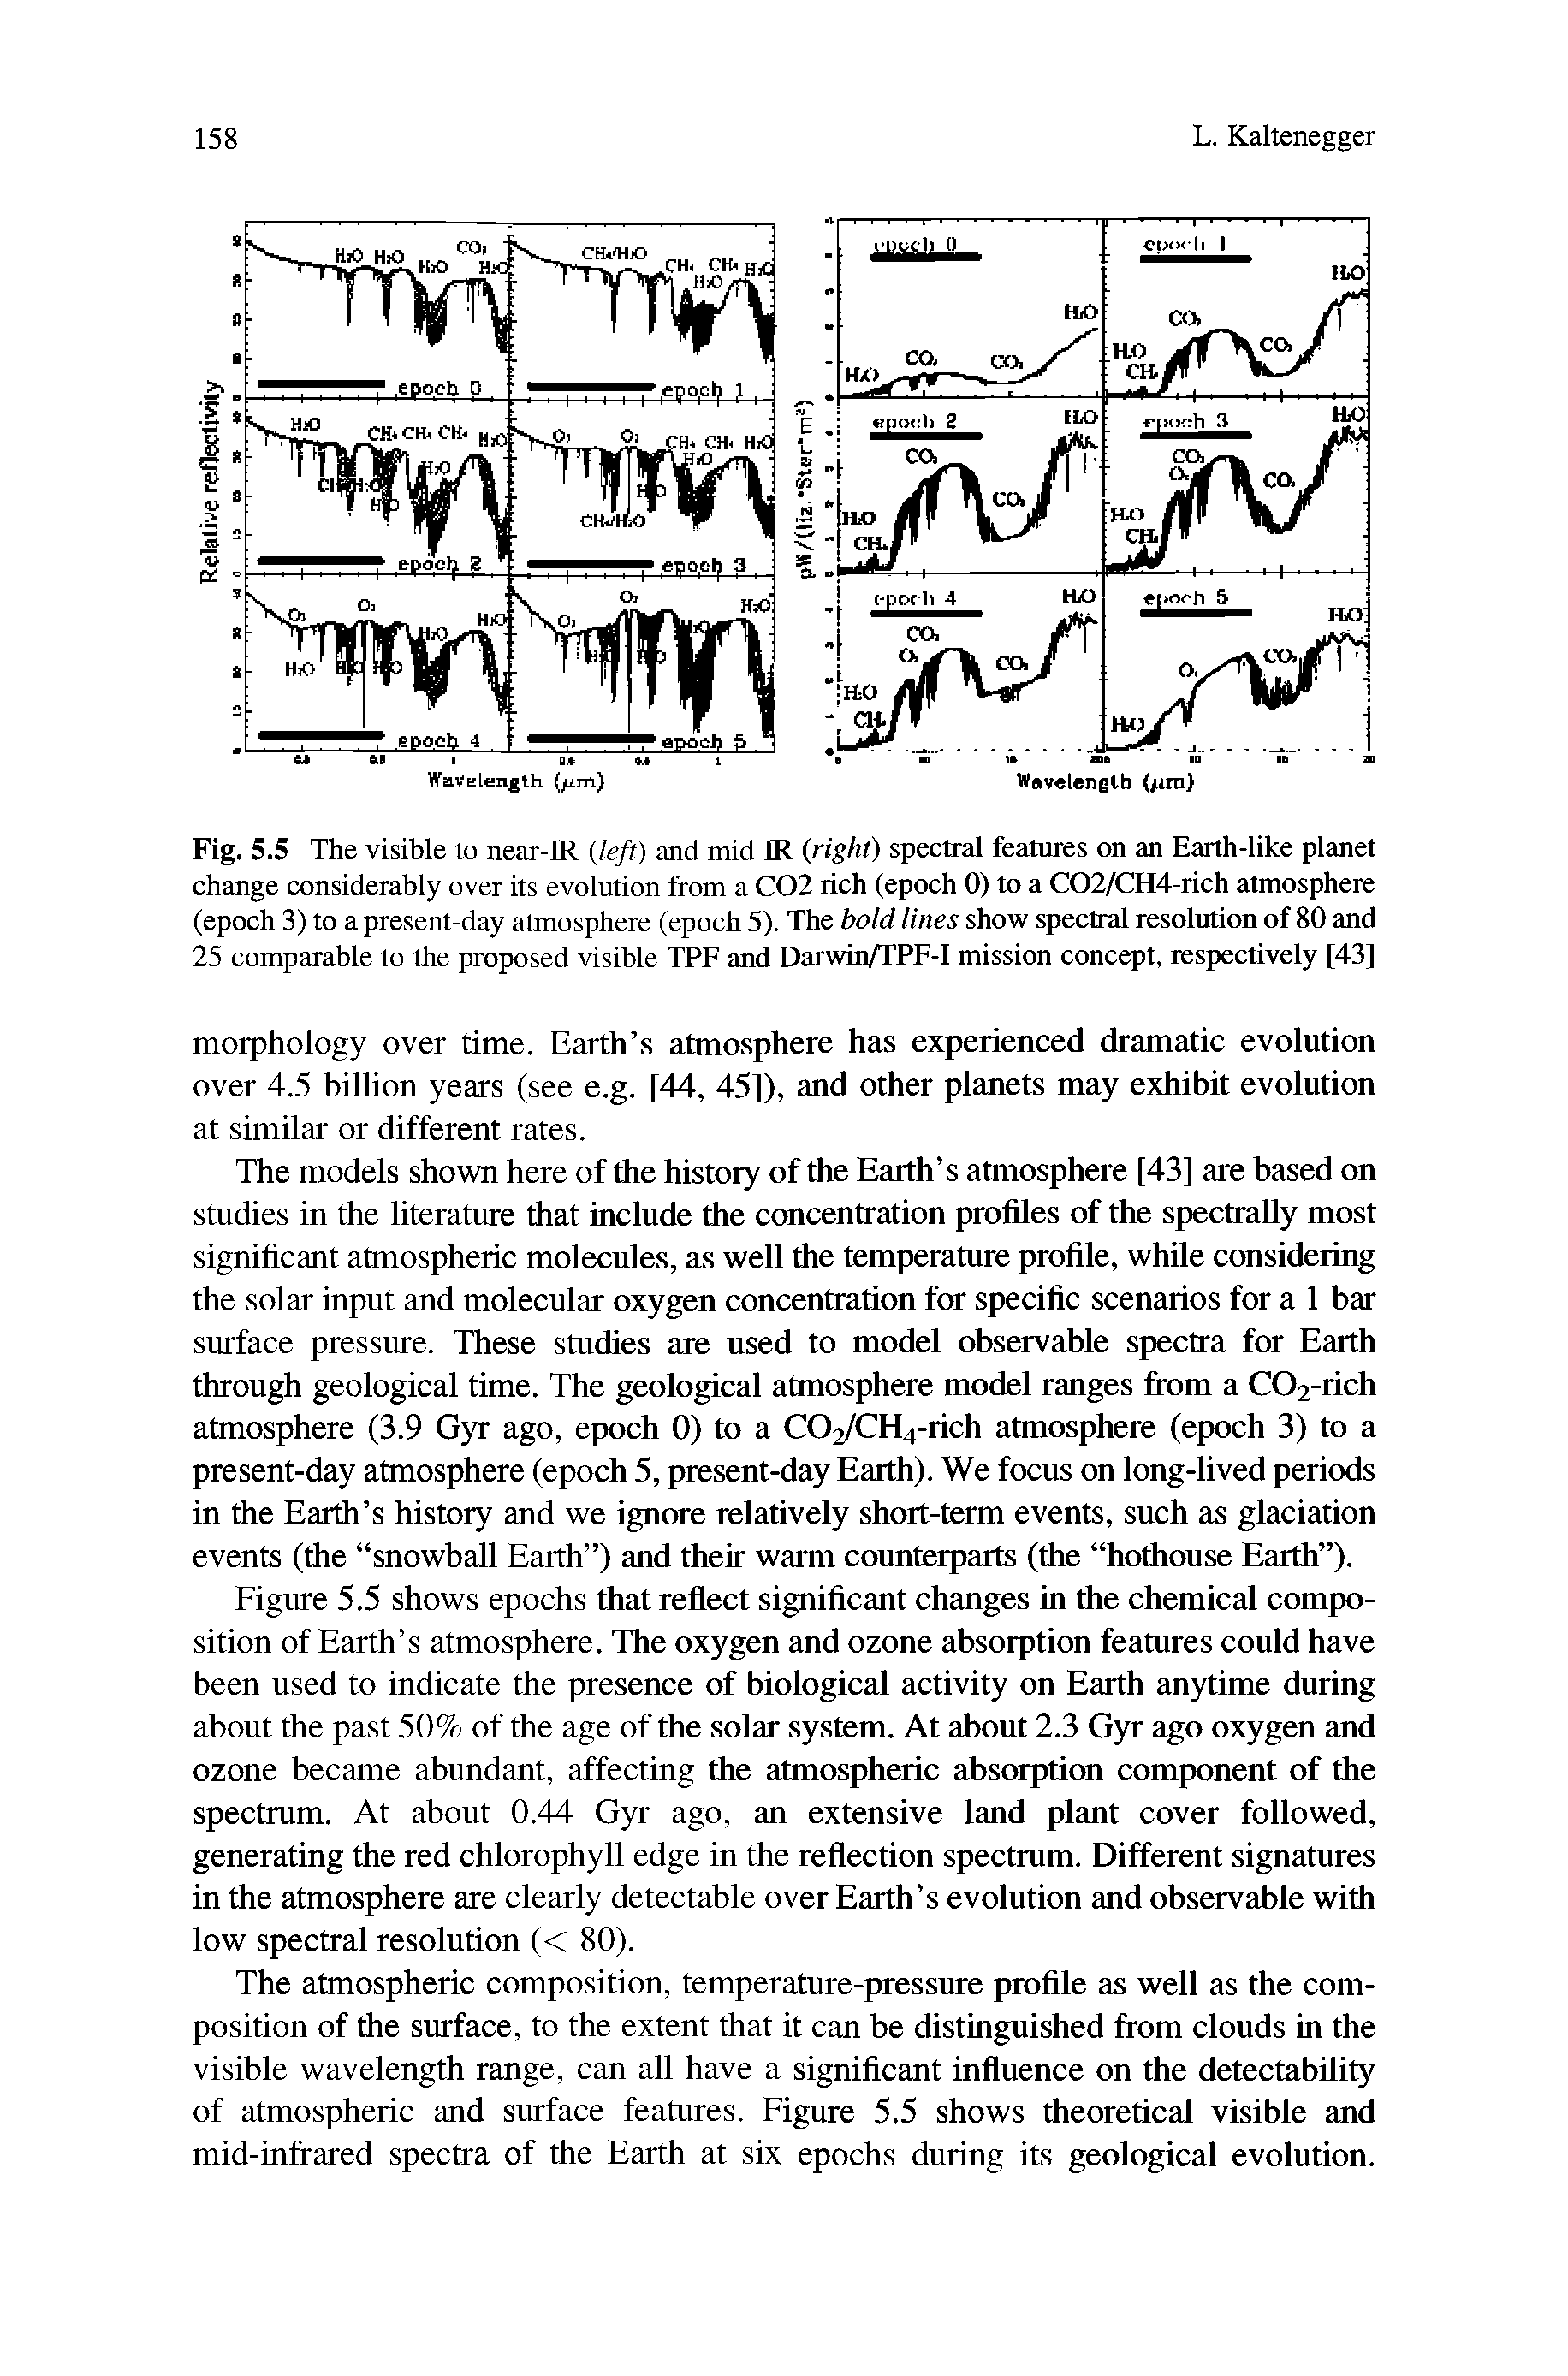 Fig. 5.5 The visible to near-IR (left) and mid IR (right) spectral features on an Earth-like planet change considerably over its evolution from a C02 rich (epoch 0) to a C02/CH4-rich atmosphere (epoch 3) to a present-day atmosphere (epoch 5). The bold lines show spectral resolution of 80 and 25 comparable to the proposed visible TPF and Darwin/TPF-I mission concept, respectively [43]...